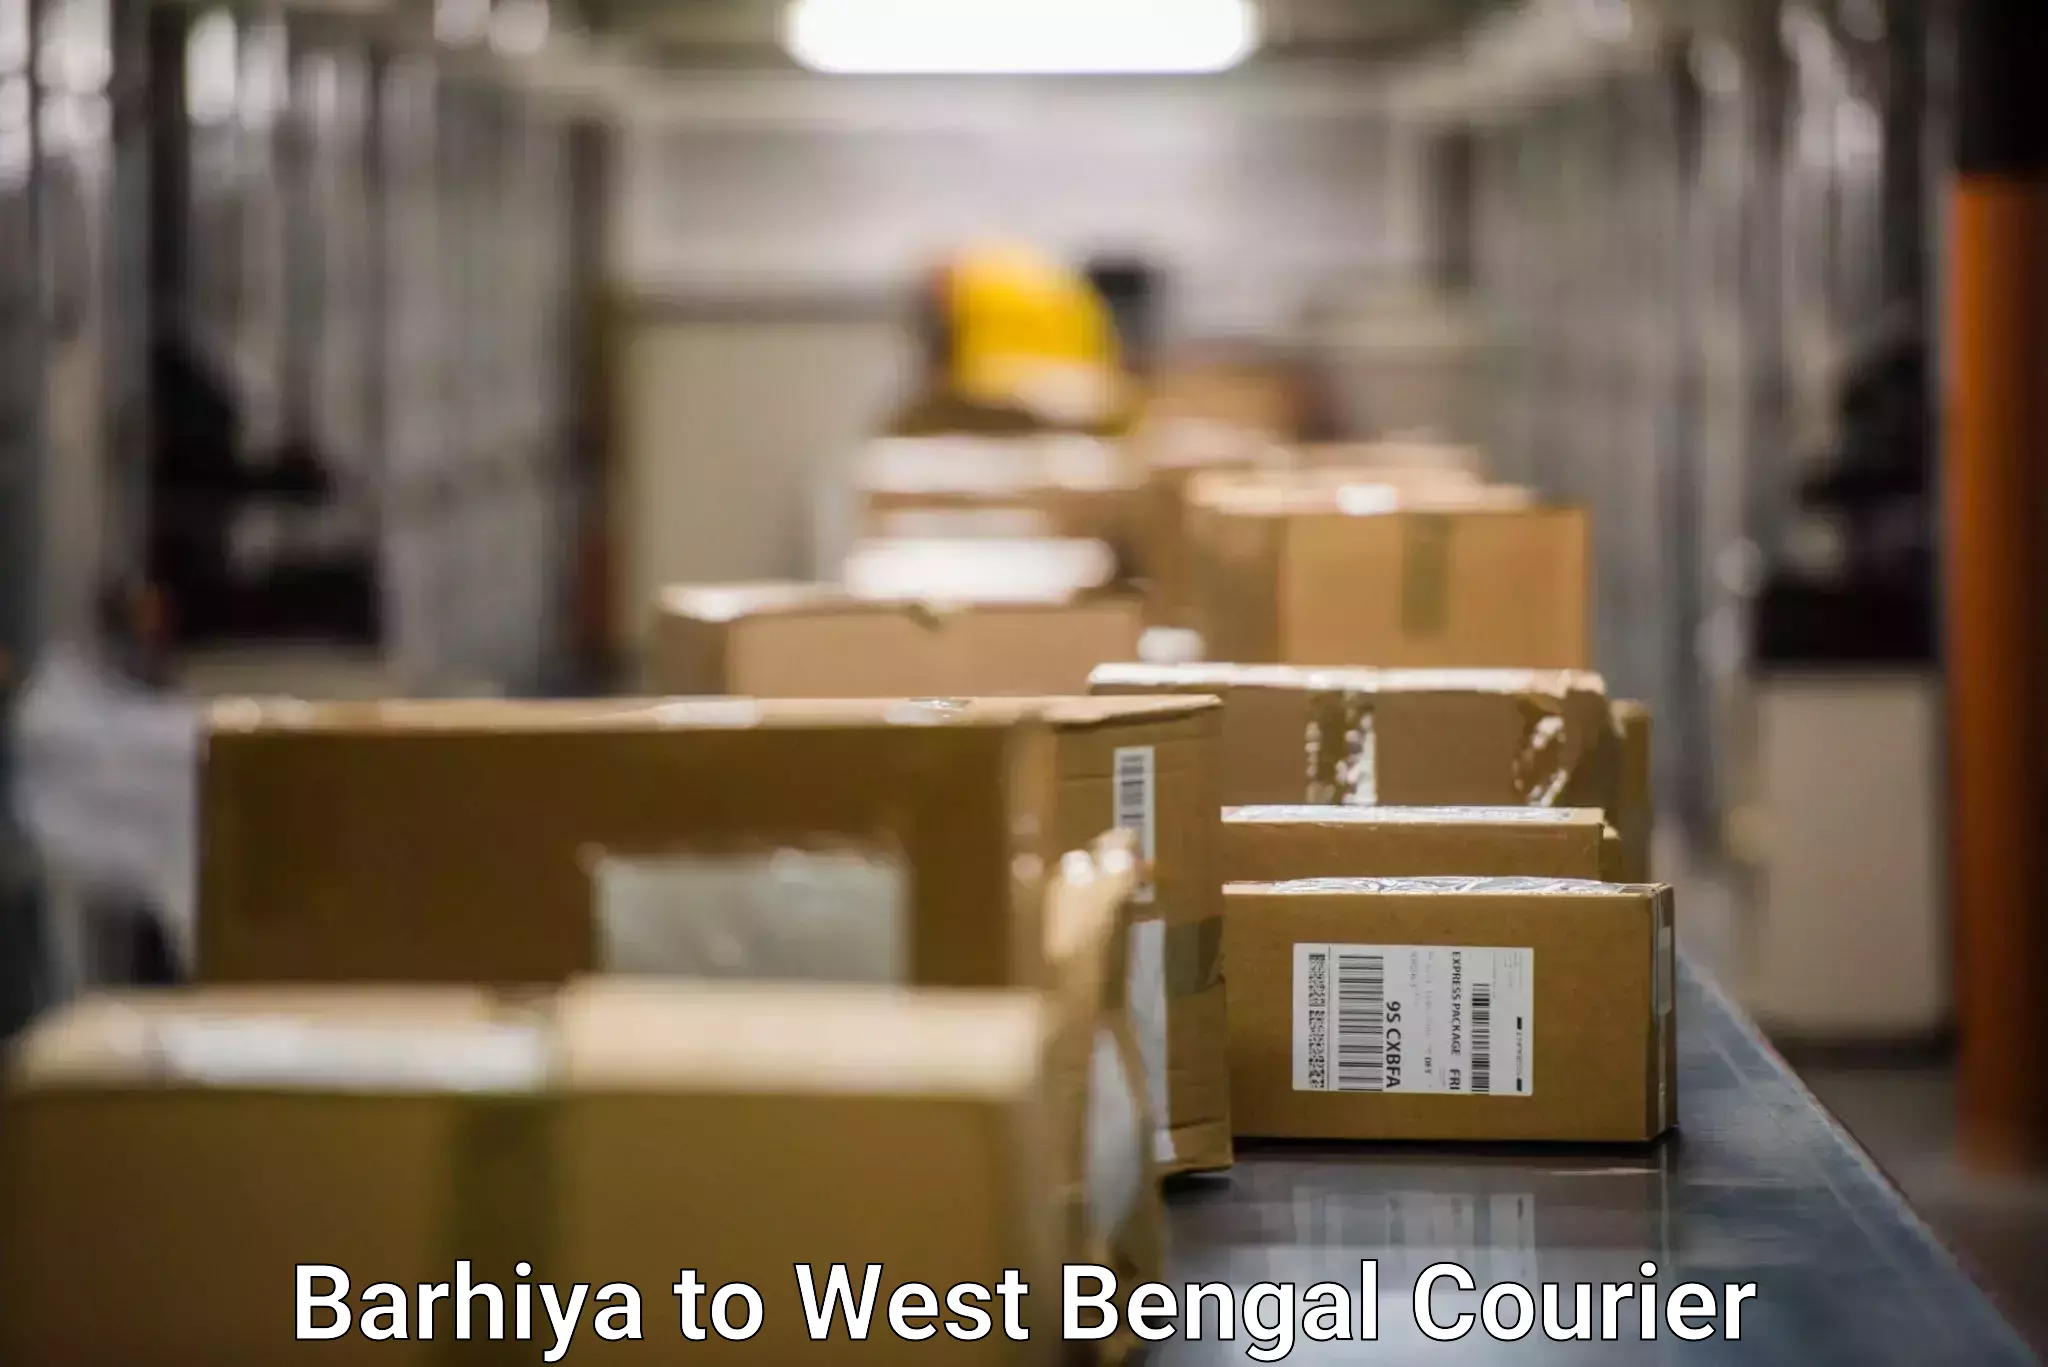 Courier service efficiency in Barhiya to West Bengal